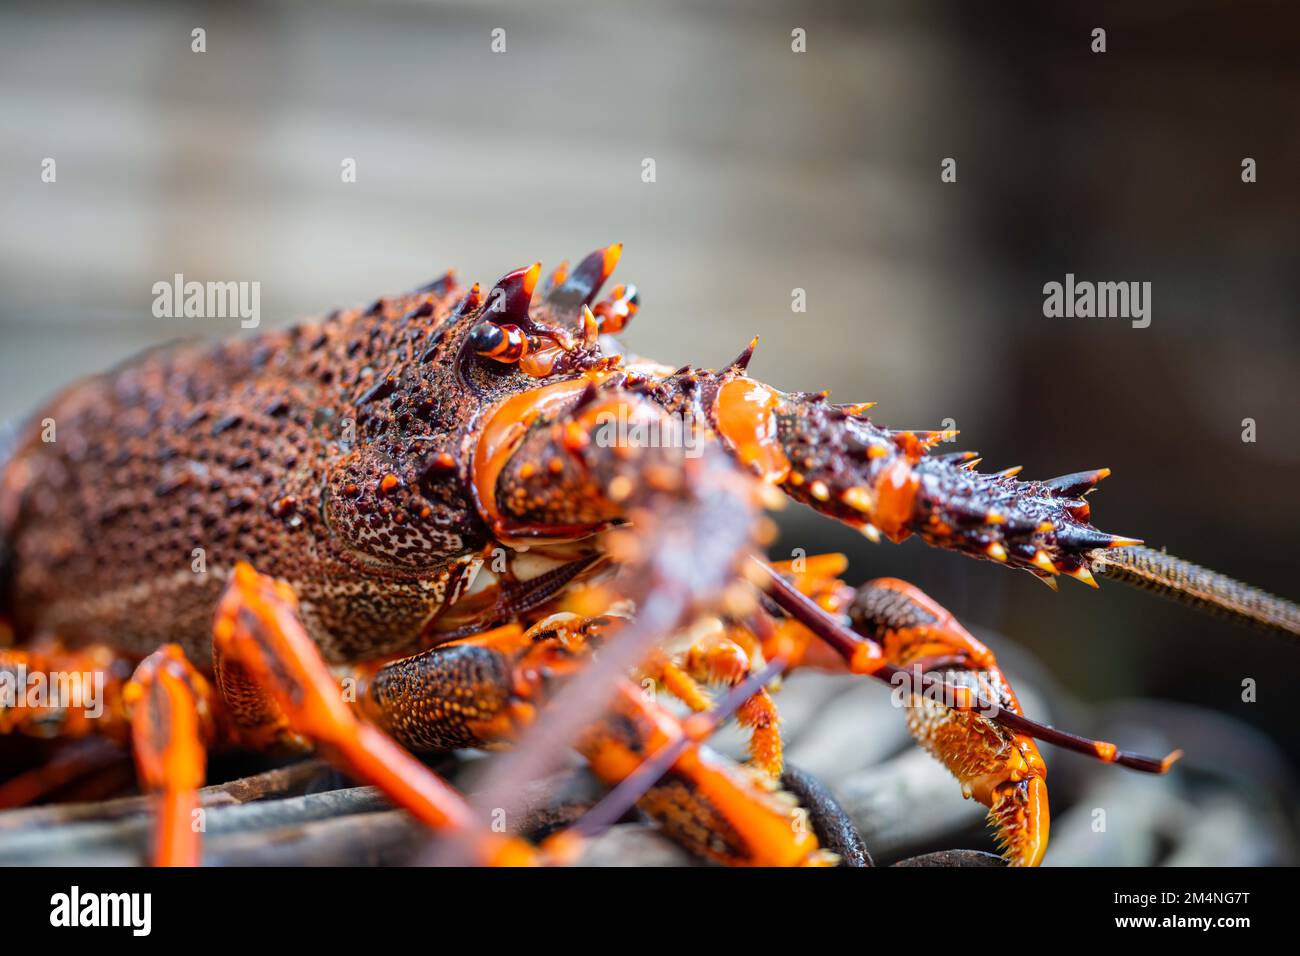 Live east coast rock lobster fishing in australia. Crayfish on a boat caught in lobster pots in australia Stock Photo